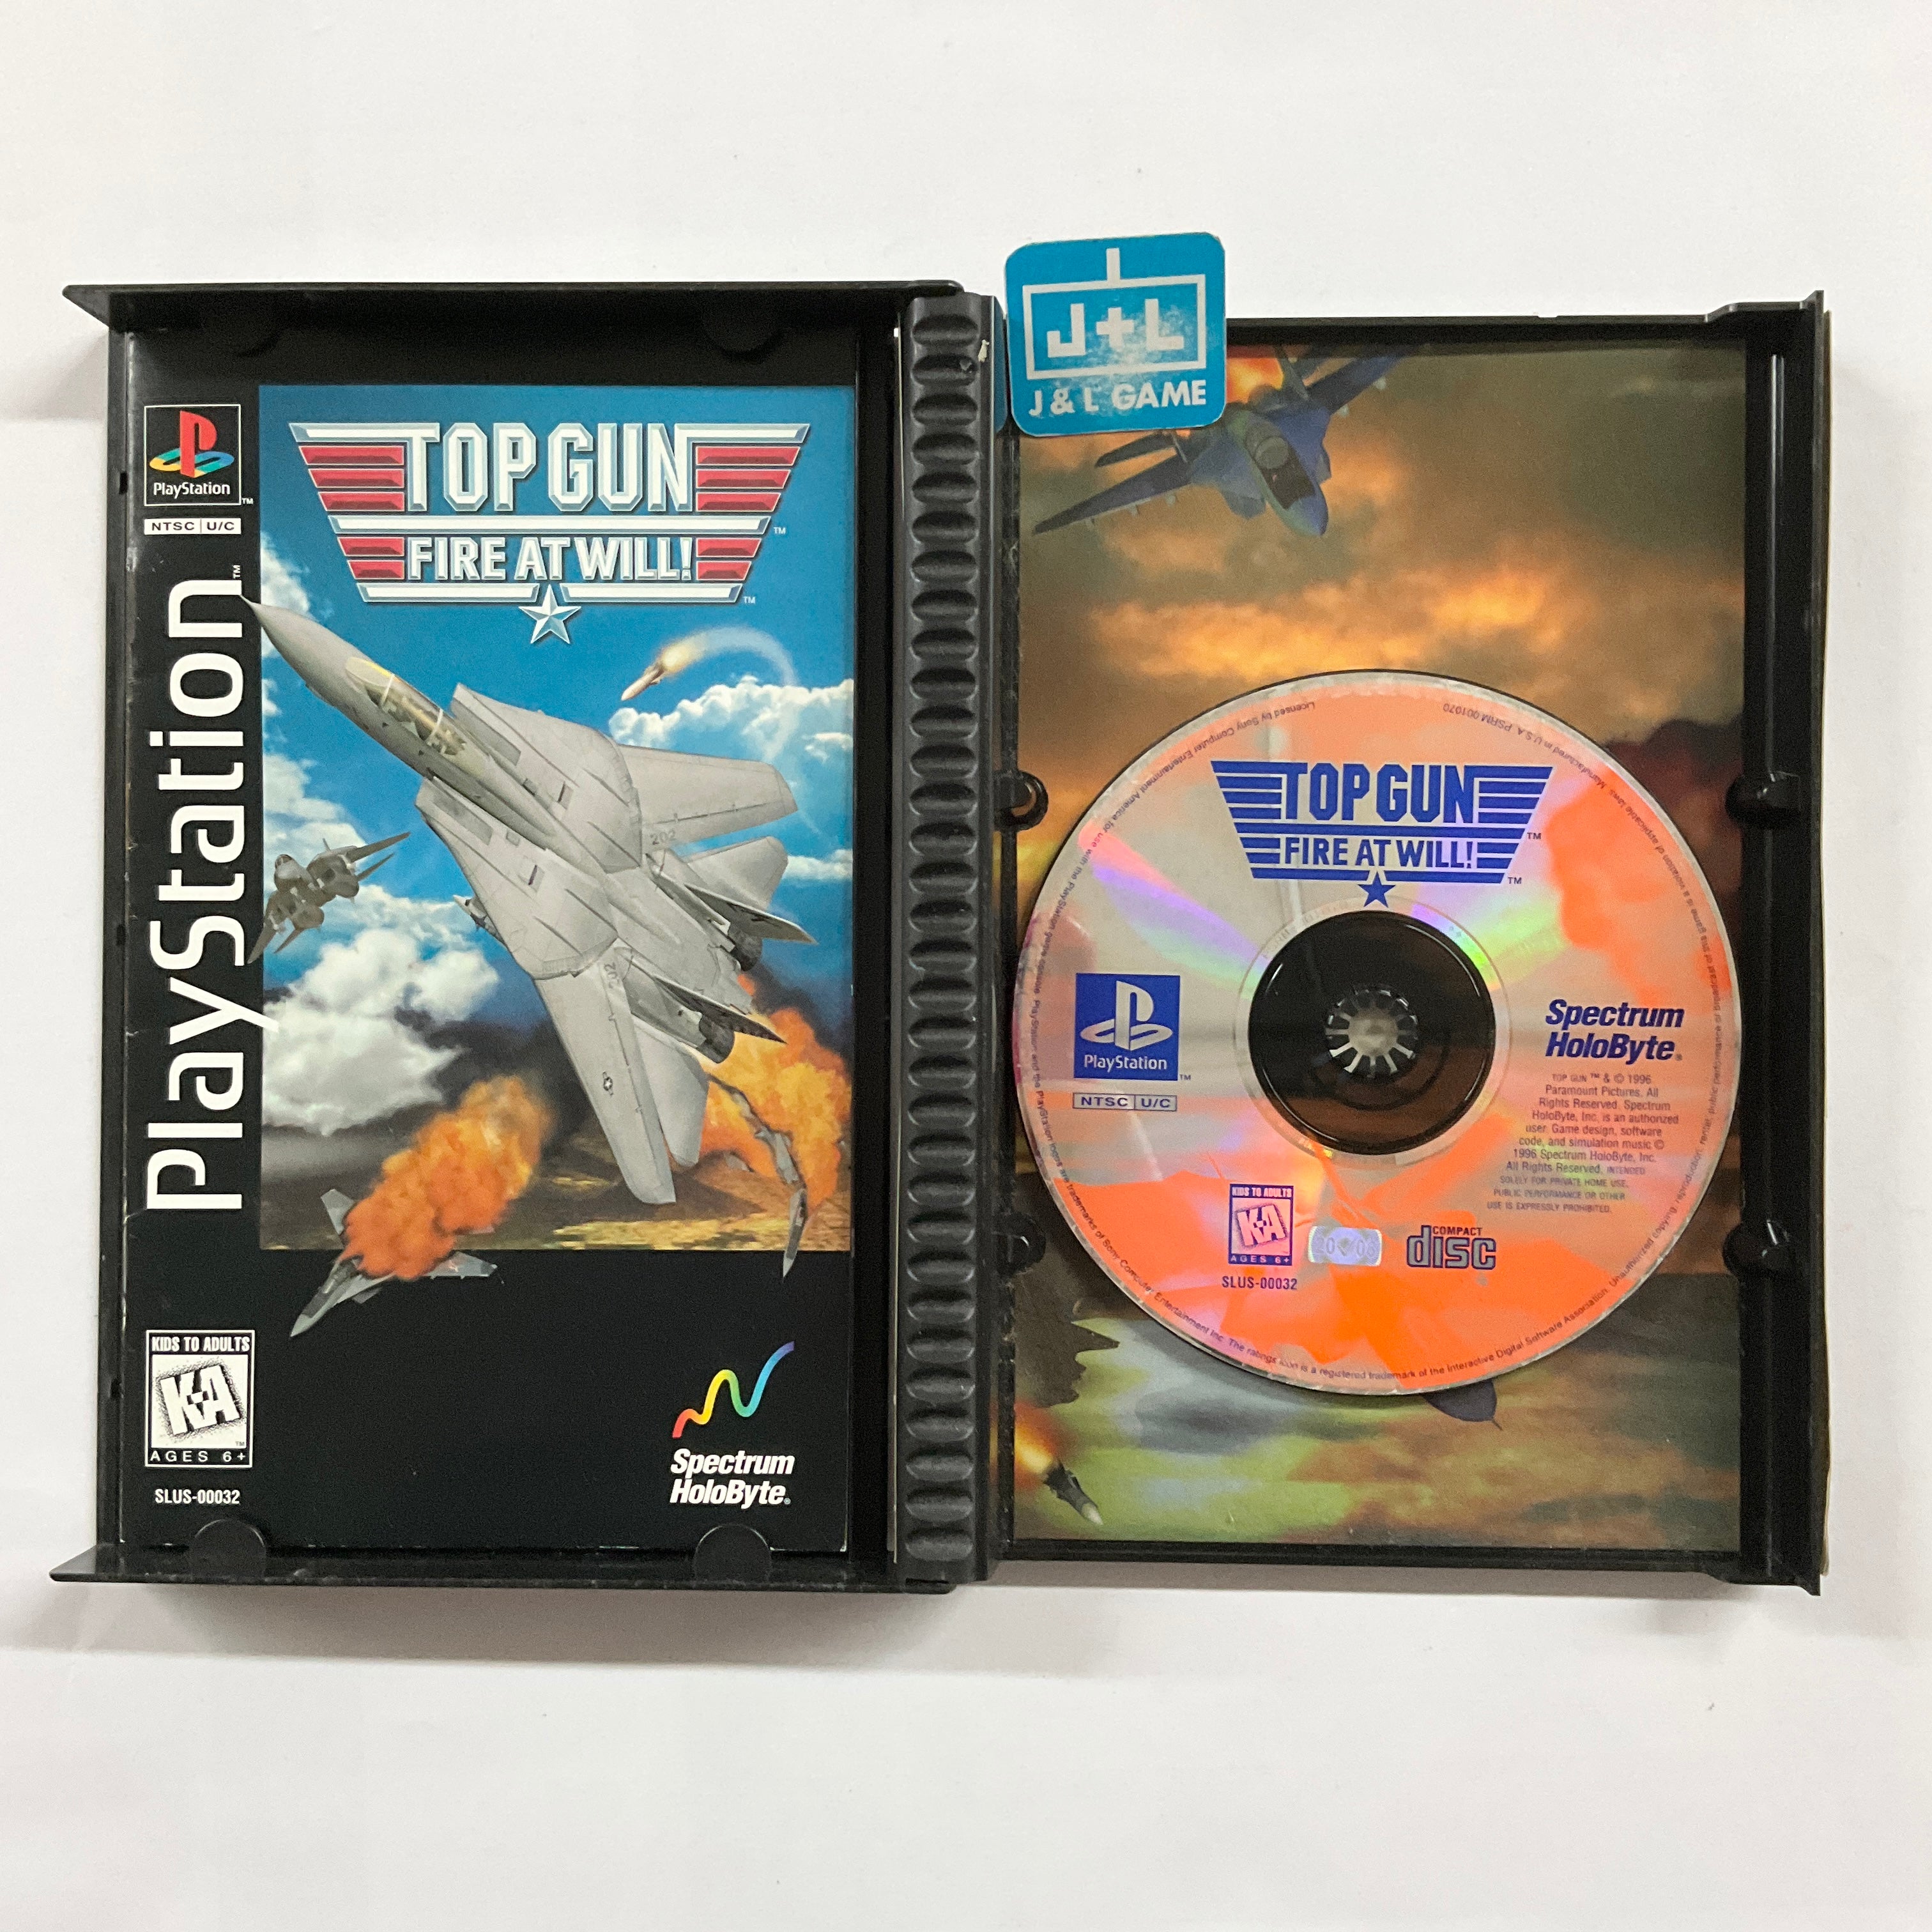 Top Gun: Fire at Will! (Long Box) - PlayStation 1 [Pre-Owned] Video Games Spectrum Holobyte   